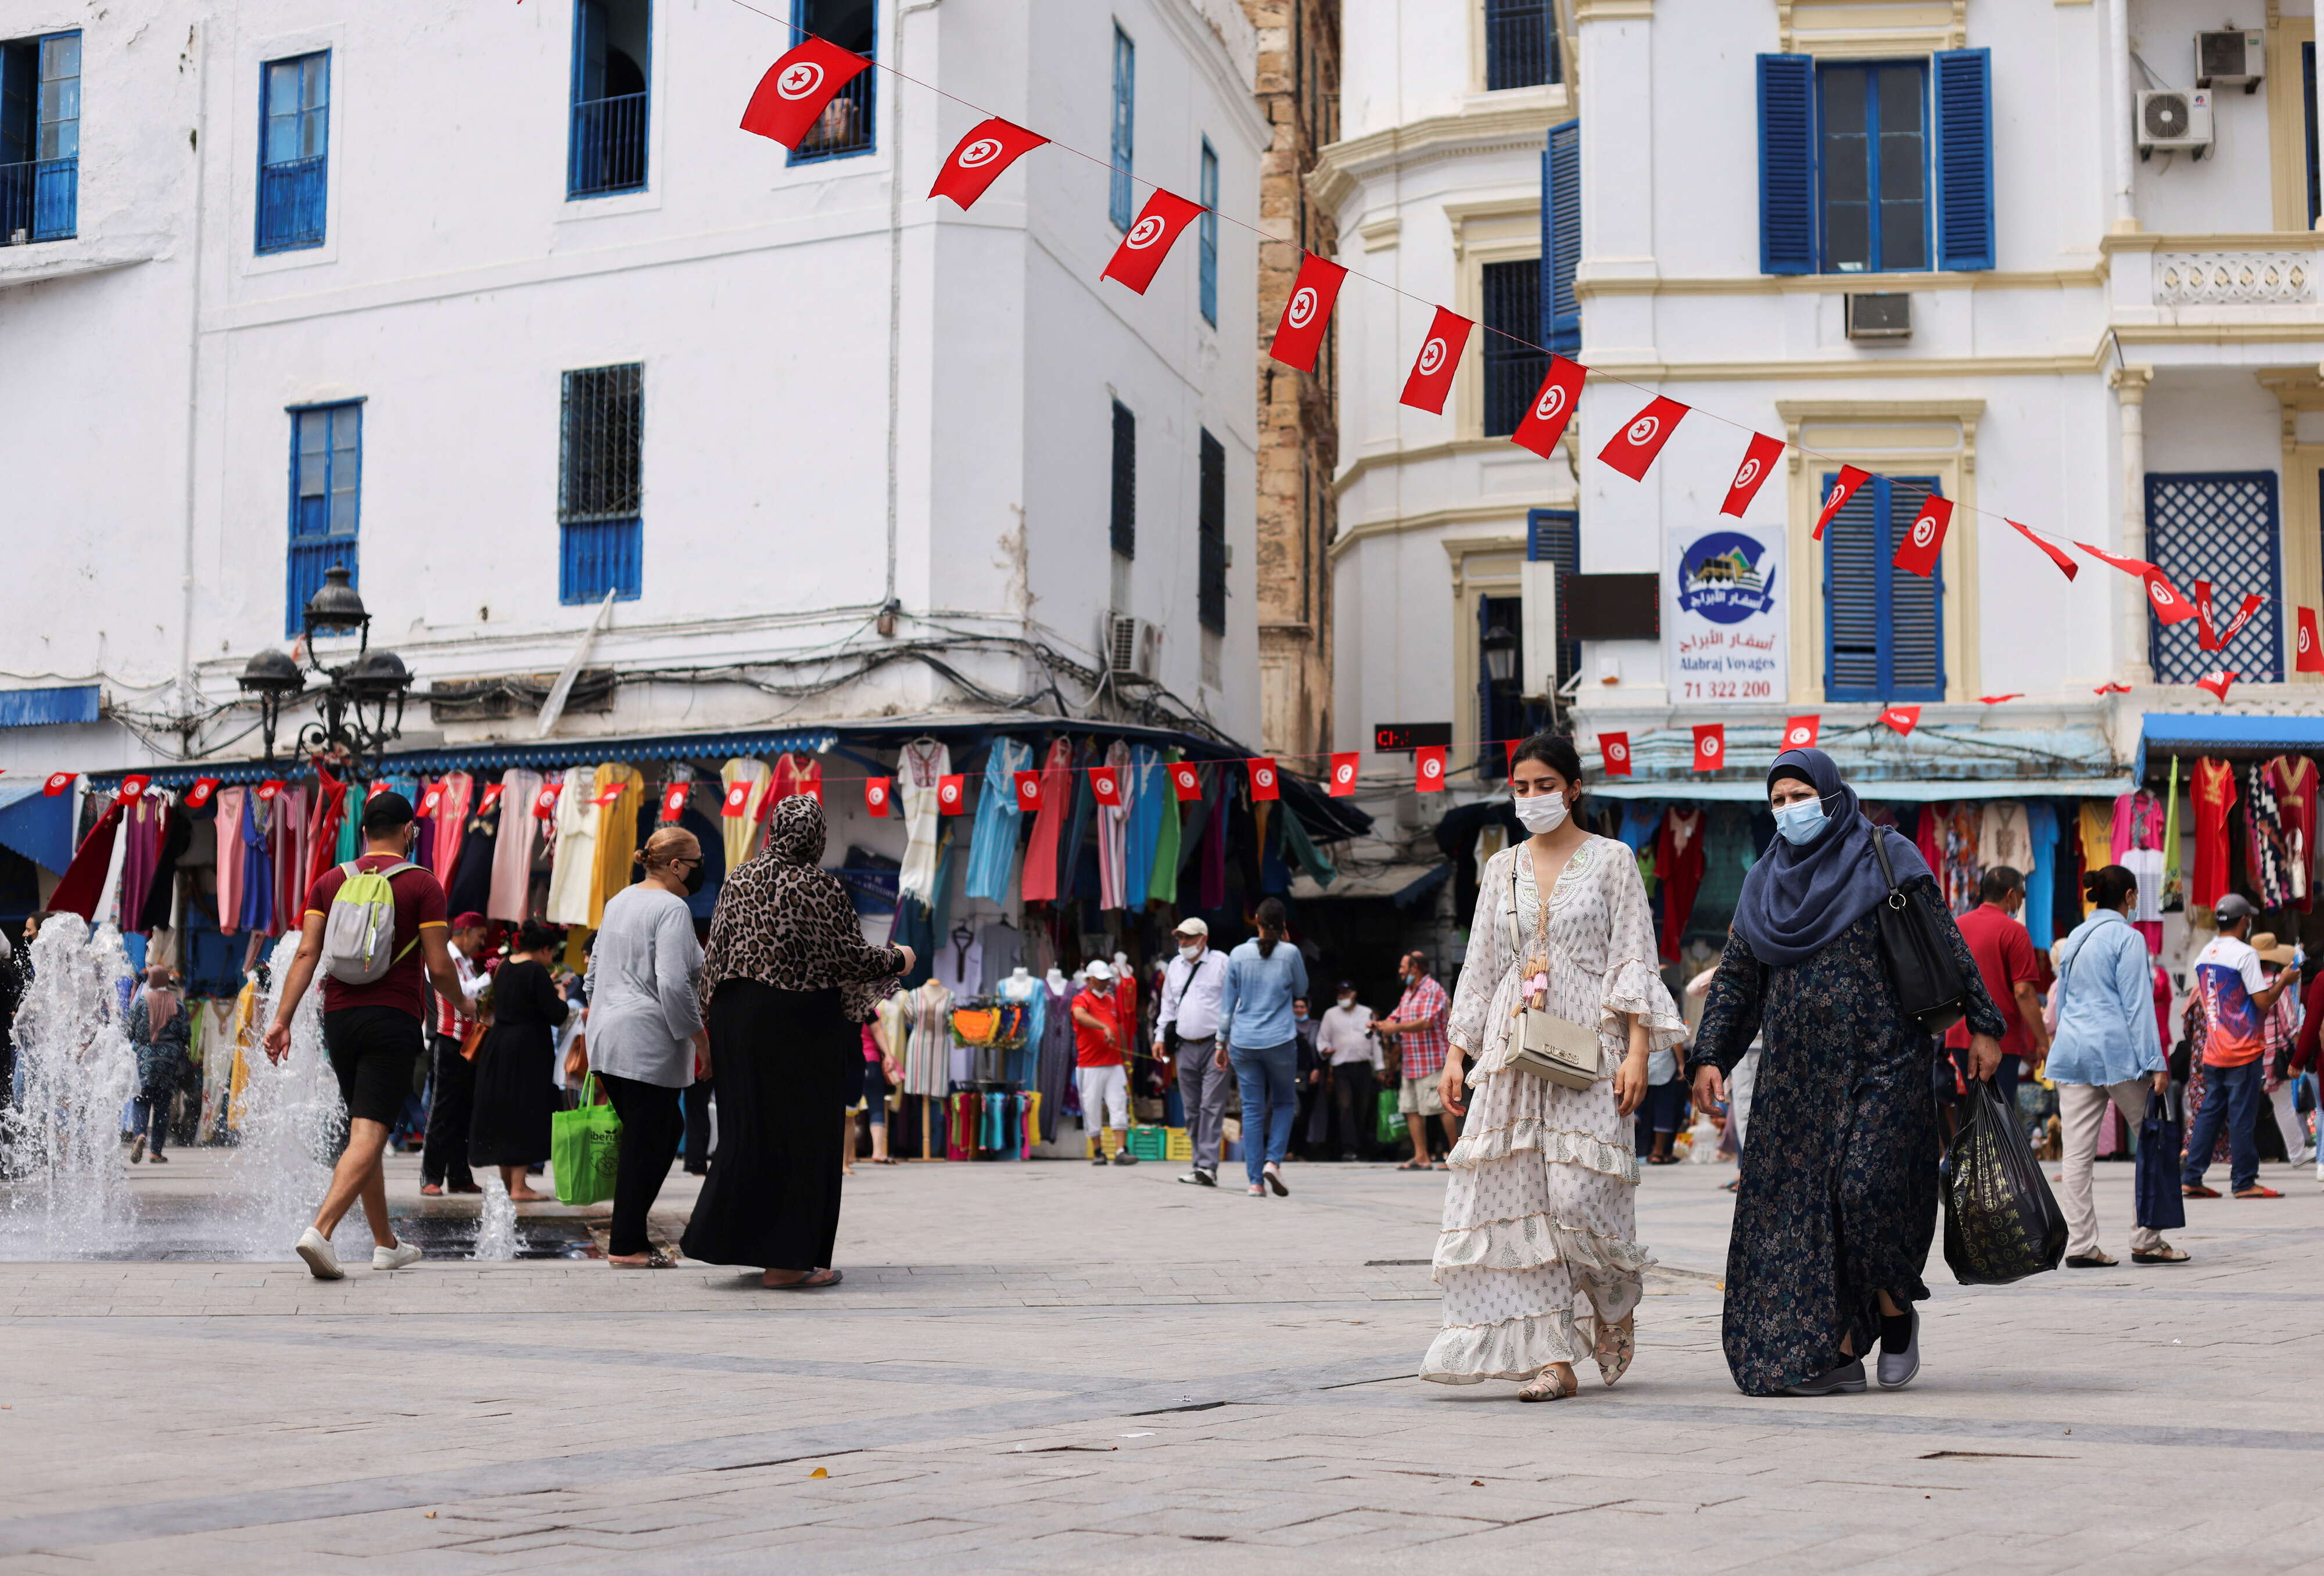 People wearing protective face masks walk past shops, amid the coronavirus disease (COVID-19) outbreak, in the Old City of Tunis